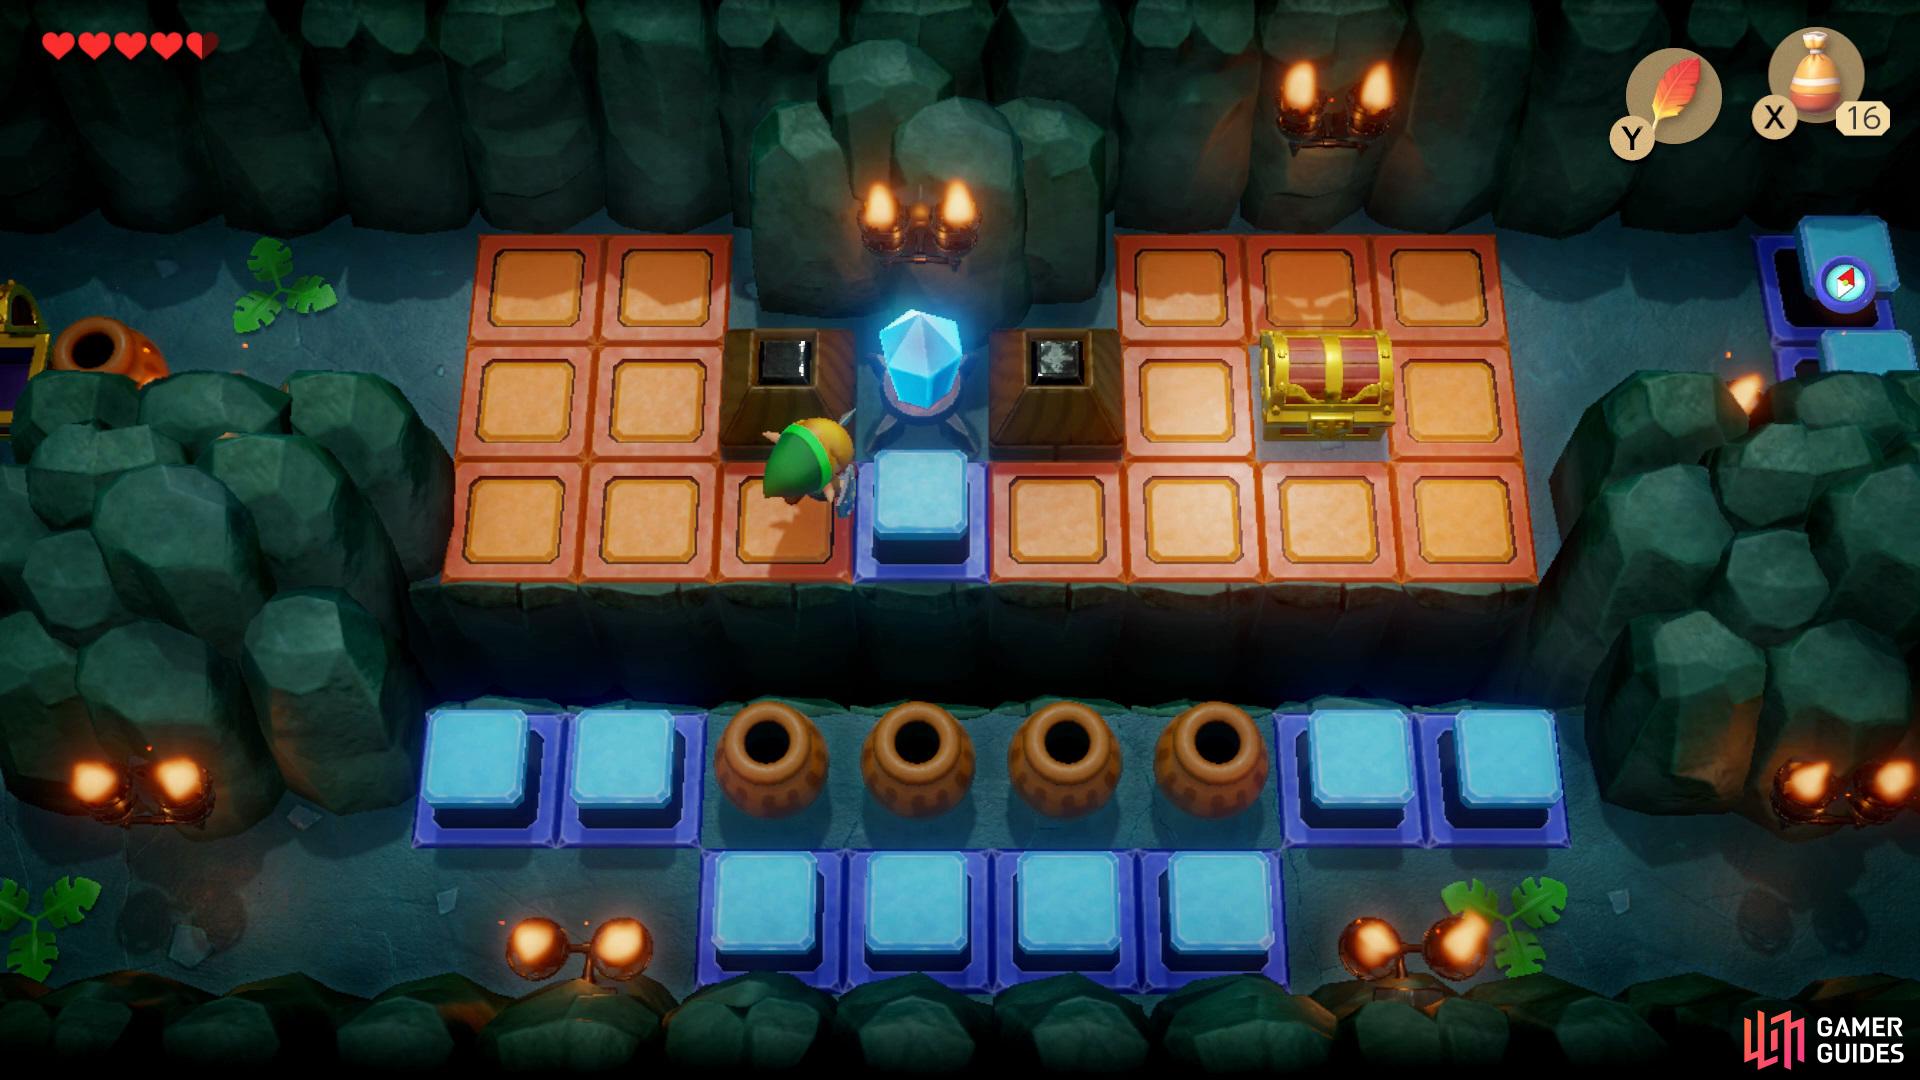 Once youve destroyed the three vases, hit the crystal to get across and then hit it again to open the chest,